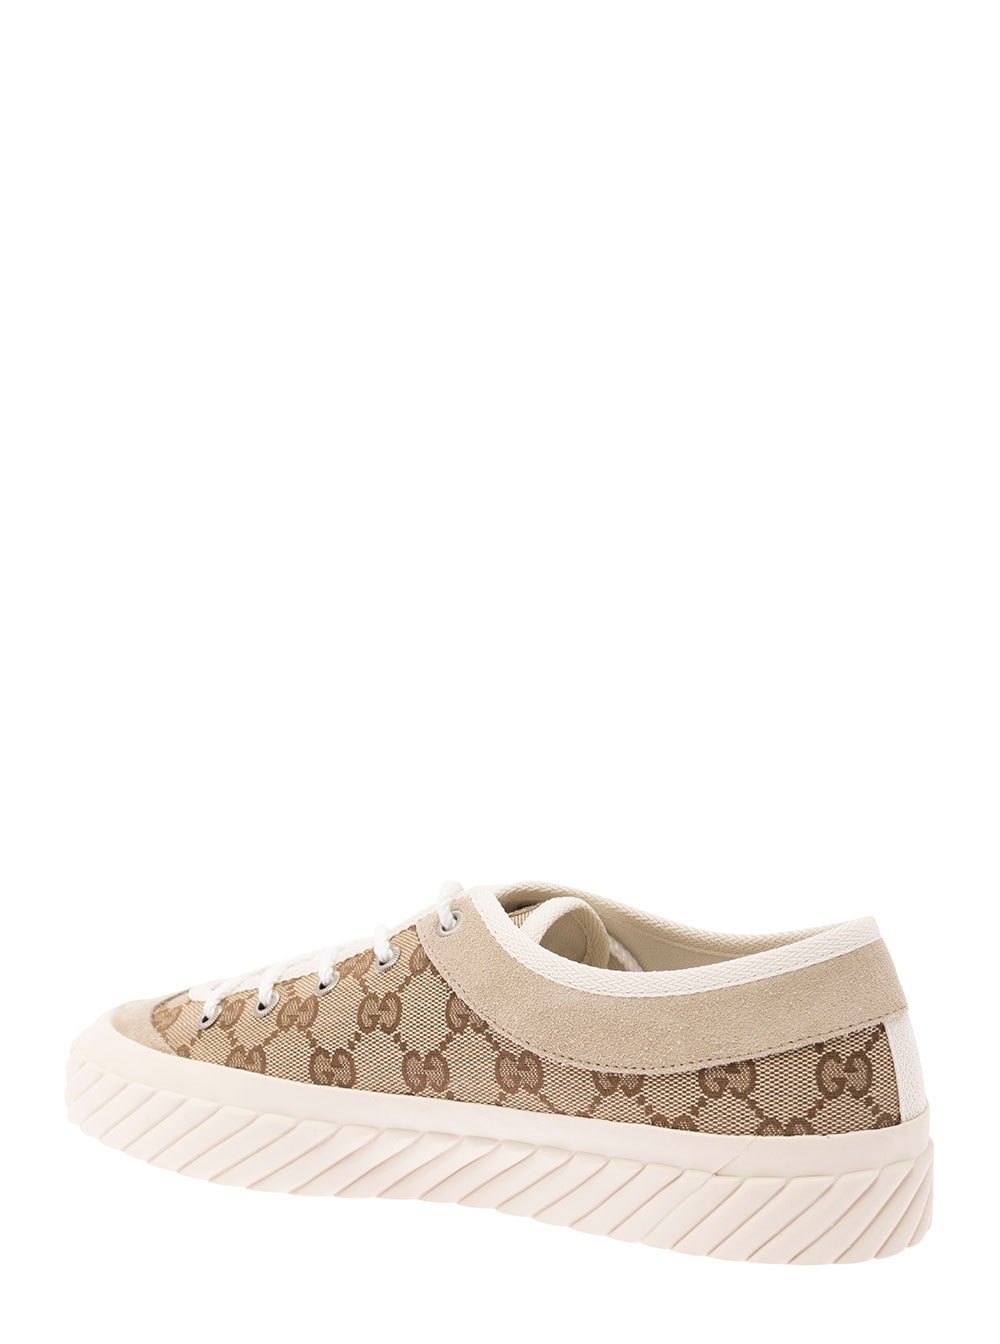 SNEAKERS FABRIC Beige available on Gaudenzi Boutique - US